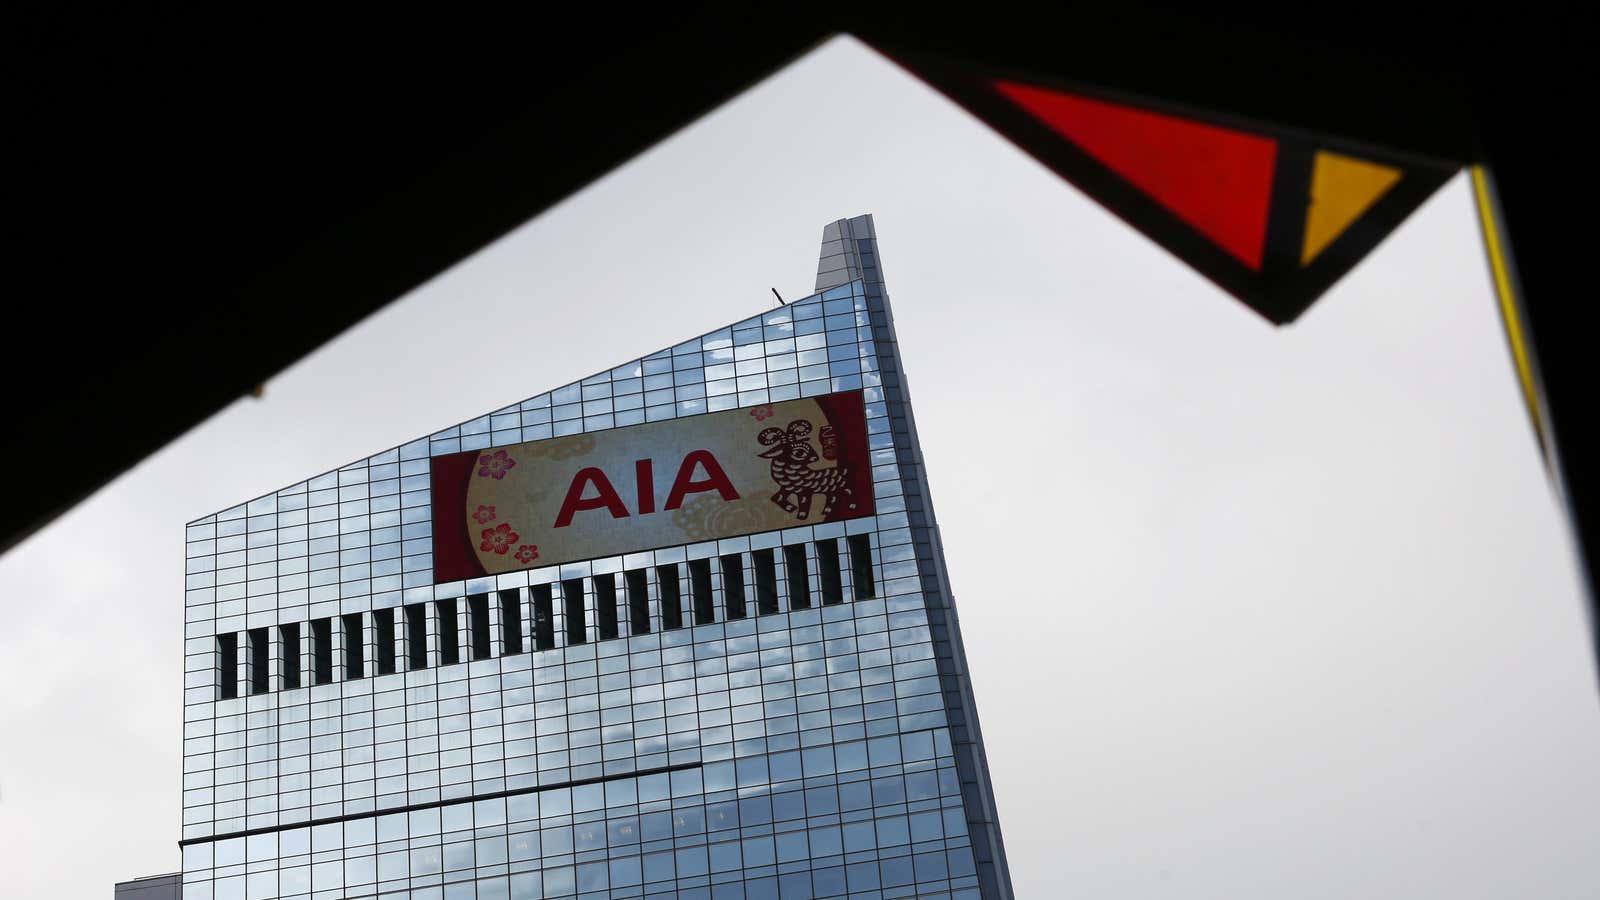 The AIA headquarters in Hong Kong.